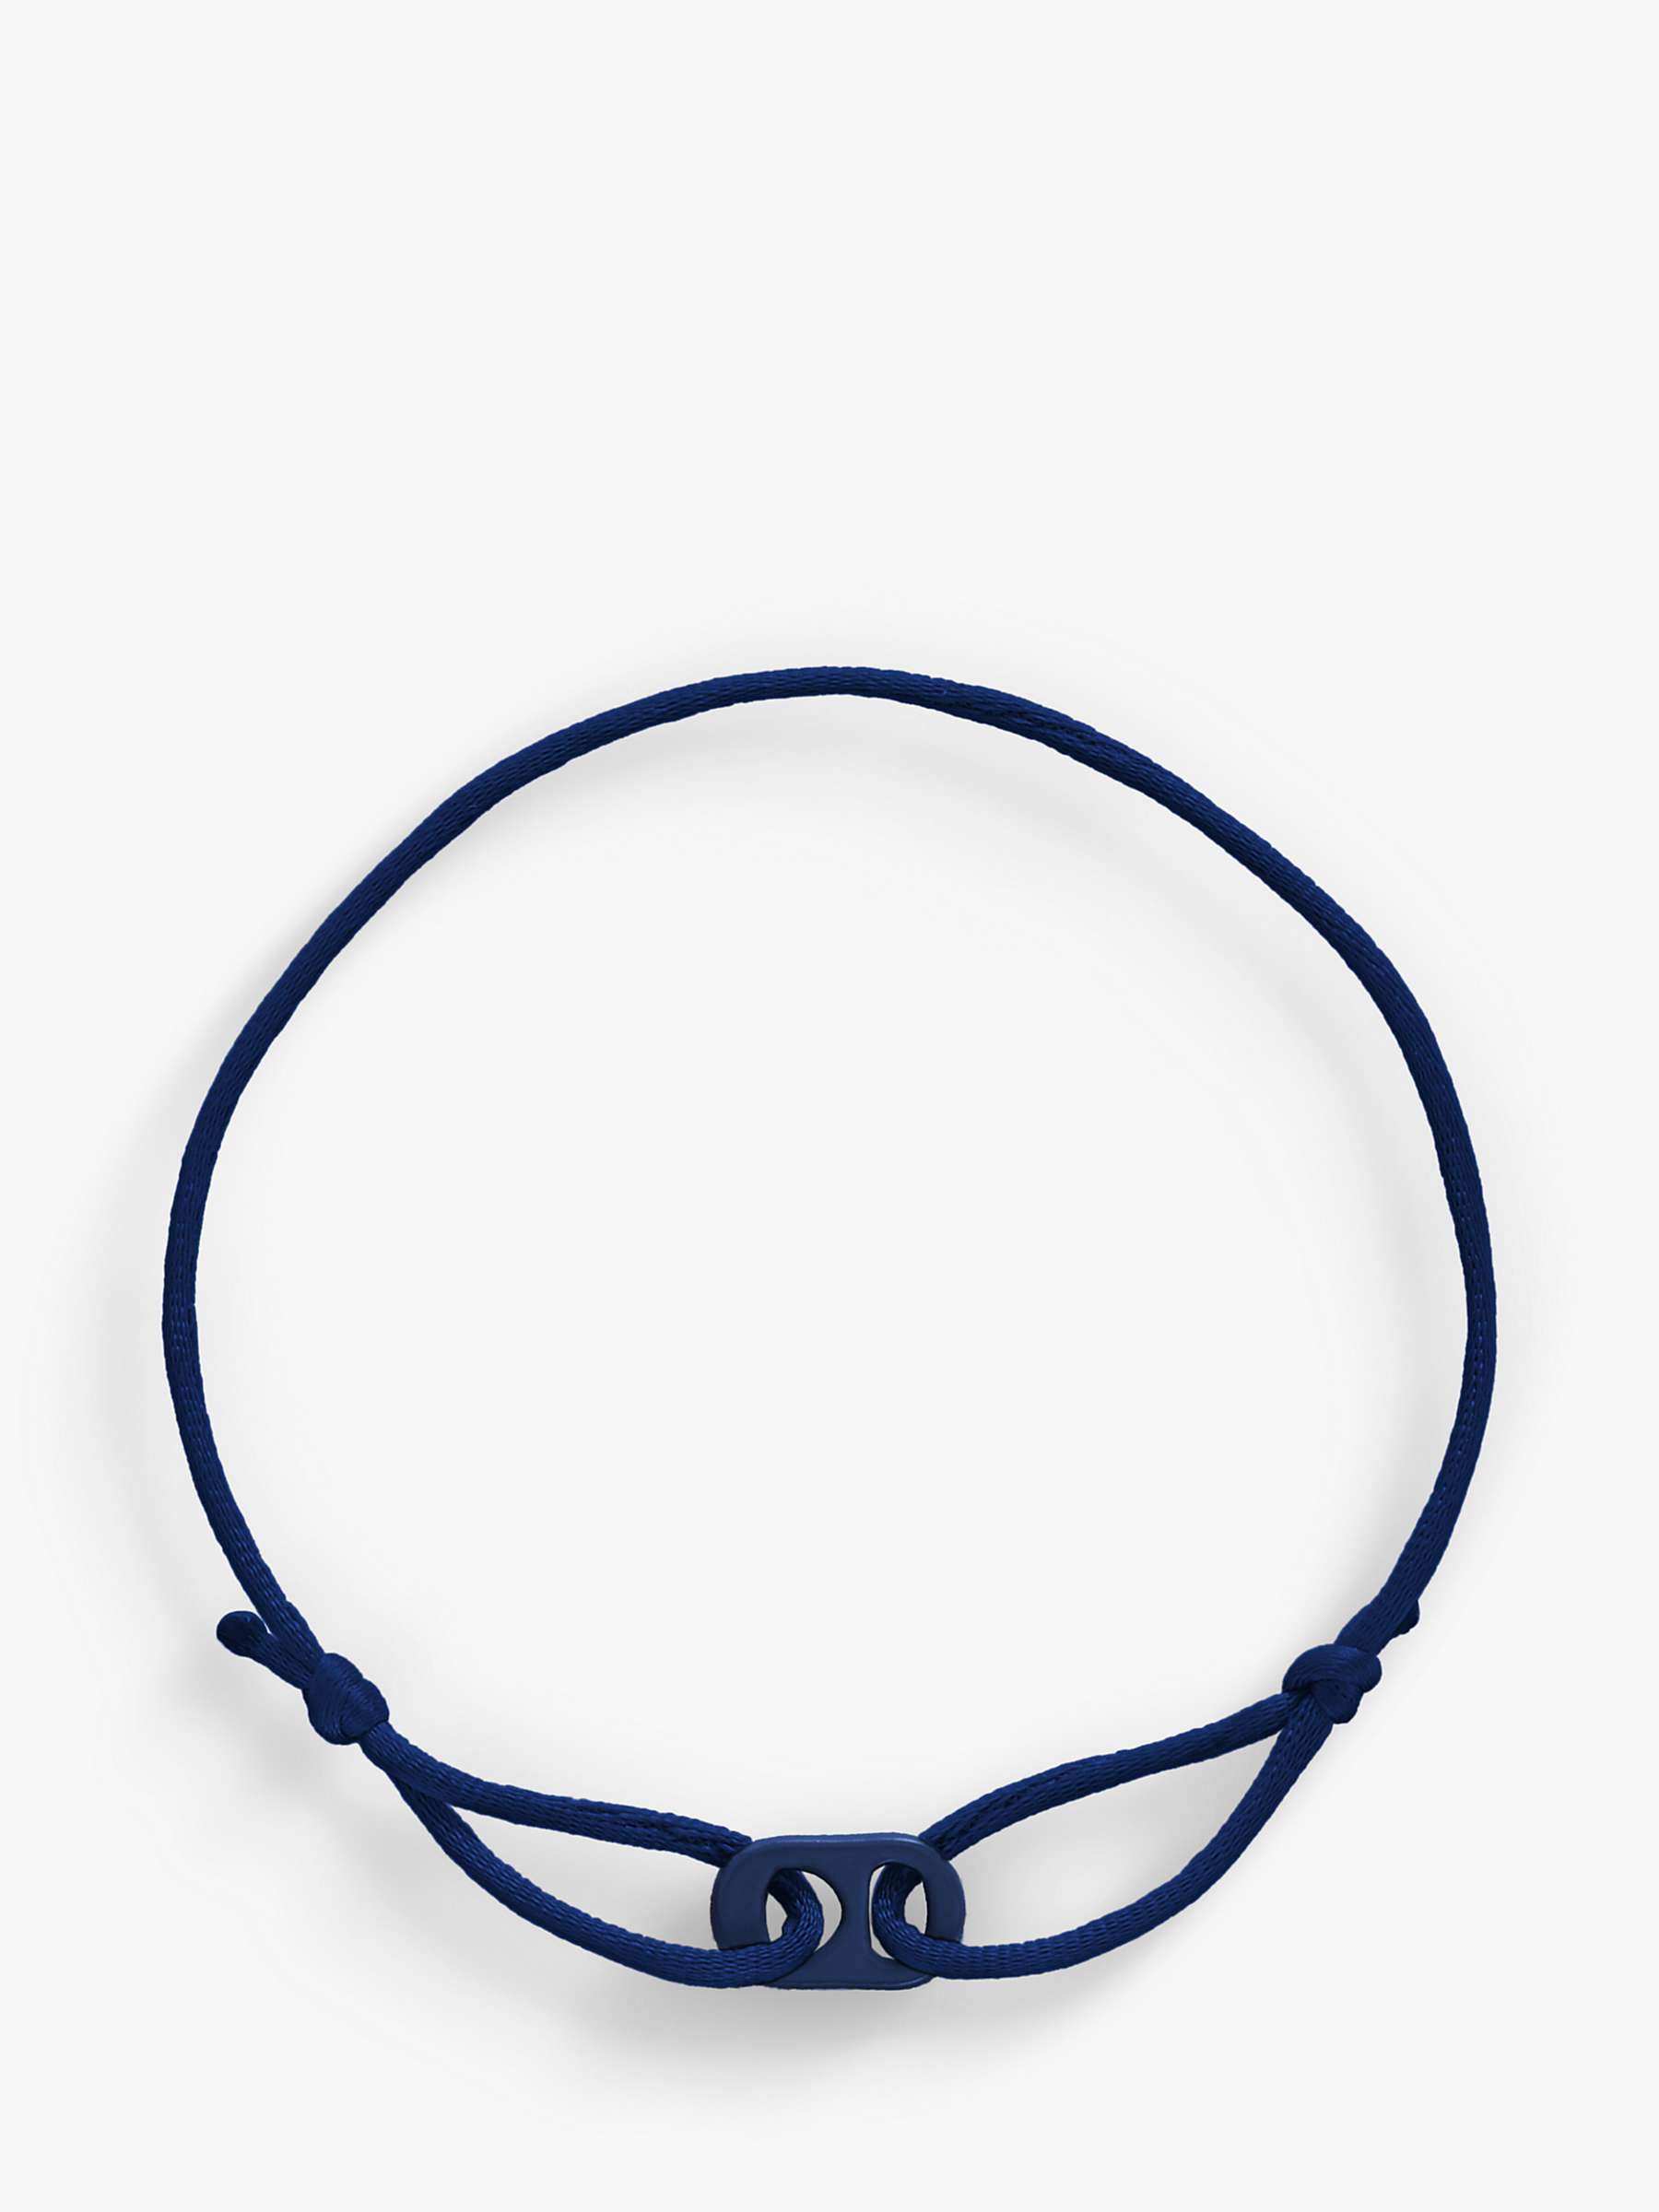 Buy #TOGETHERBAND UN Goal 17 - Partnerships For The Goals Recycled Plastic Mini Bracelet, Pack of 2, Navy Online at johnlewis.com